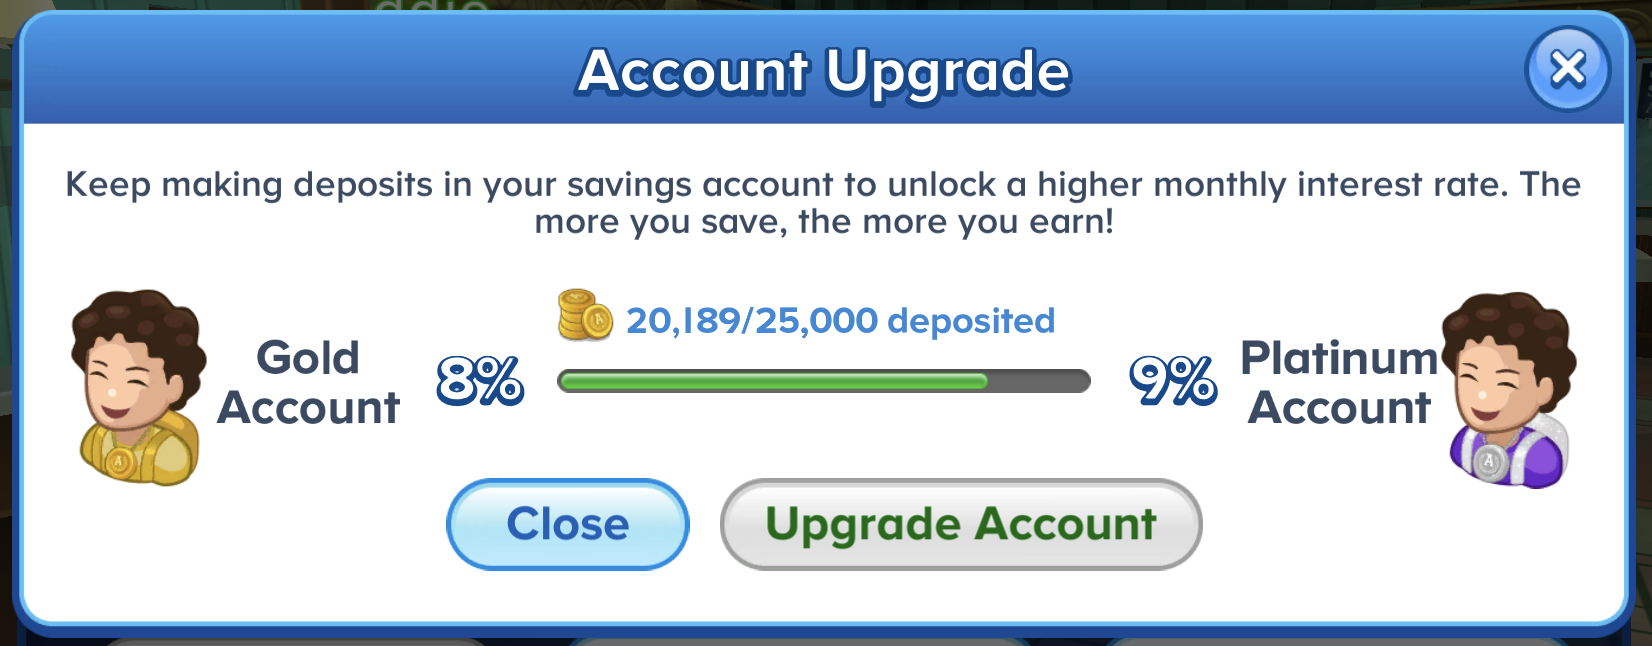 Upgrade_Account.png